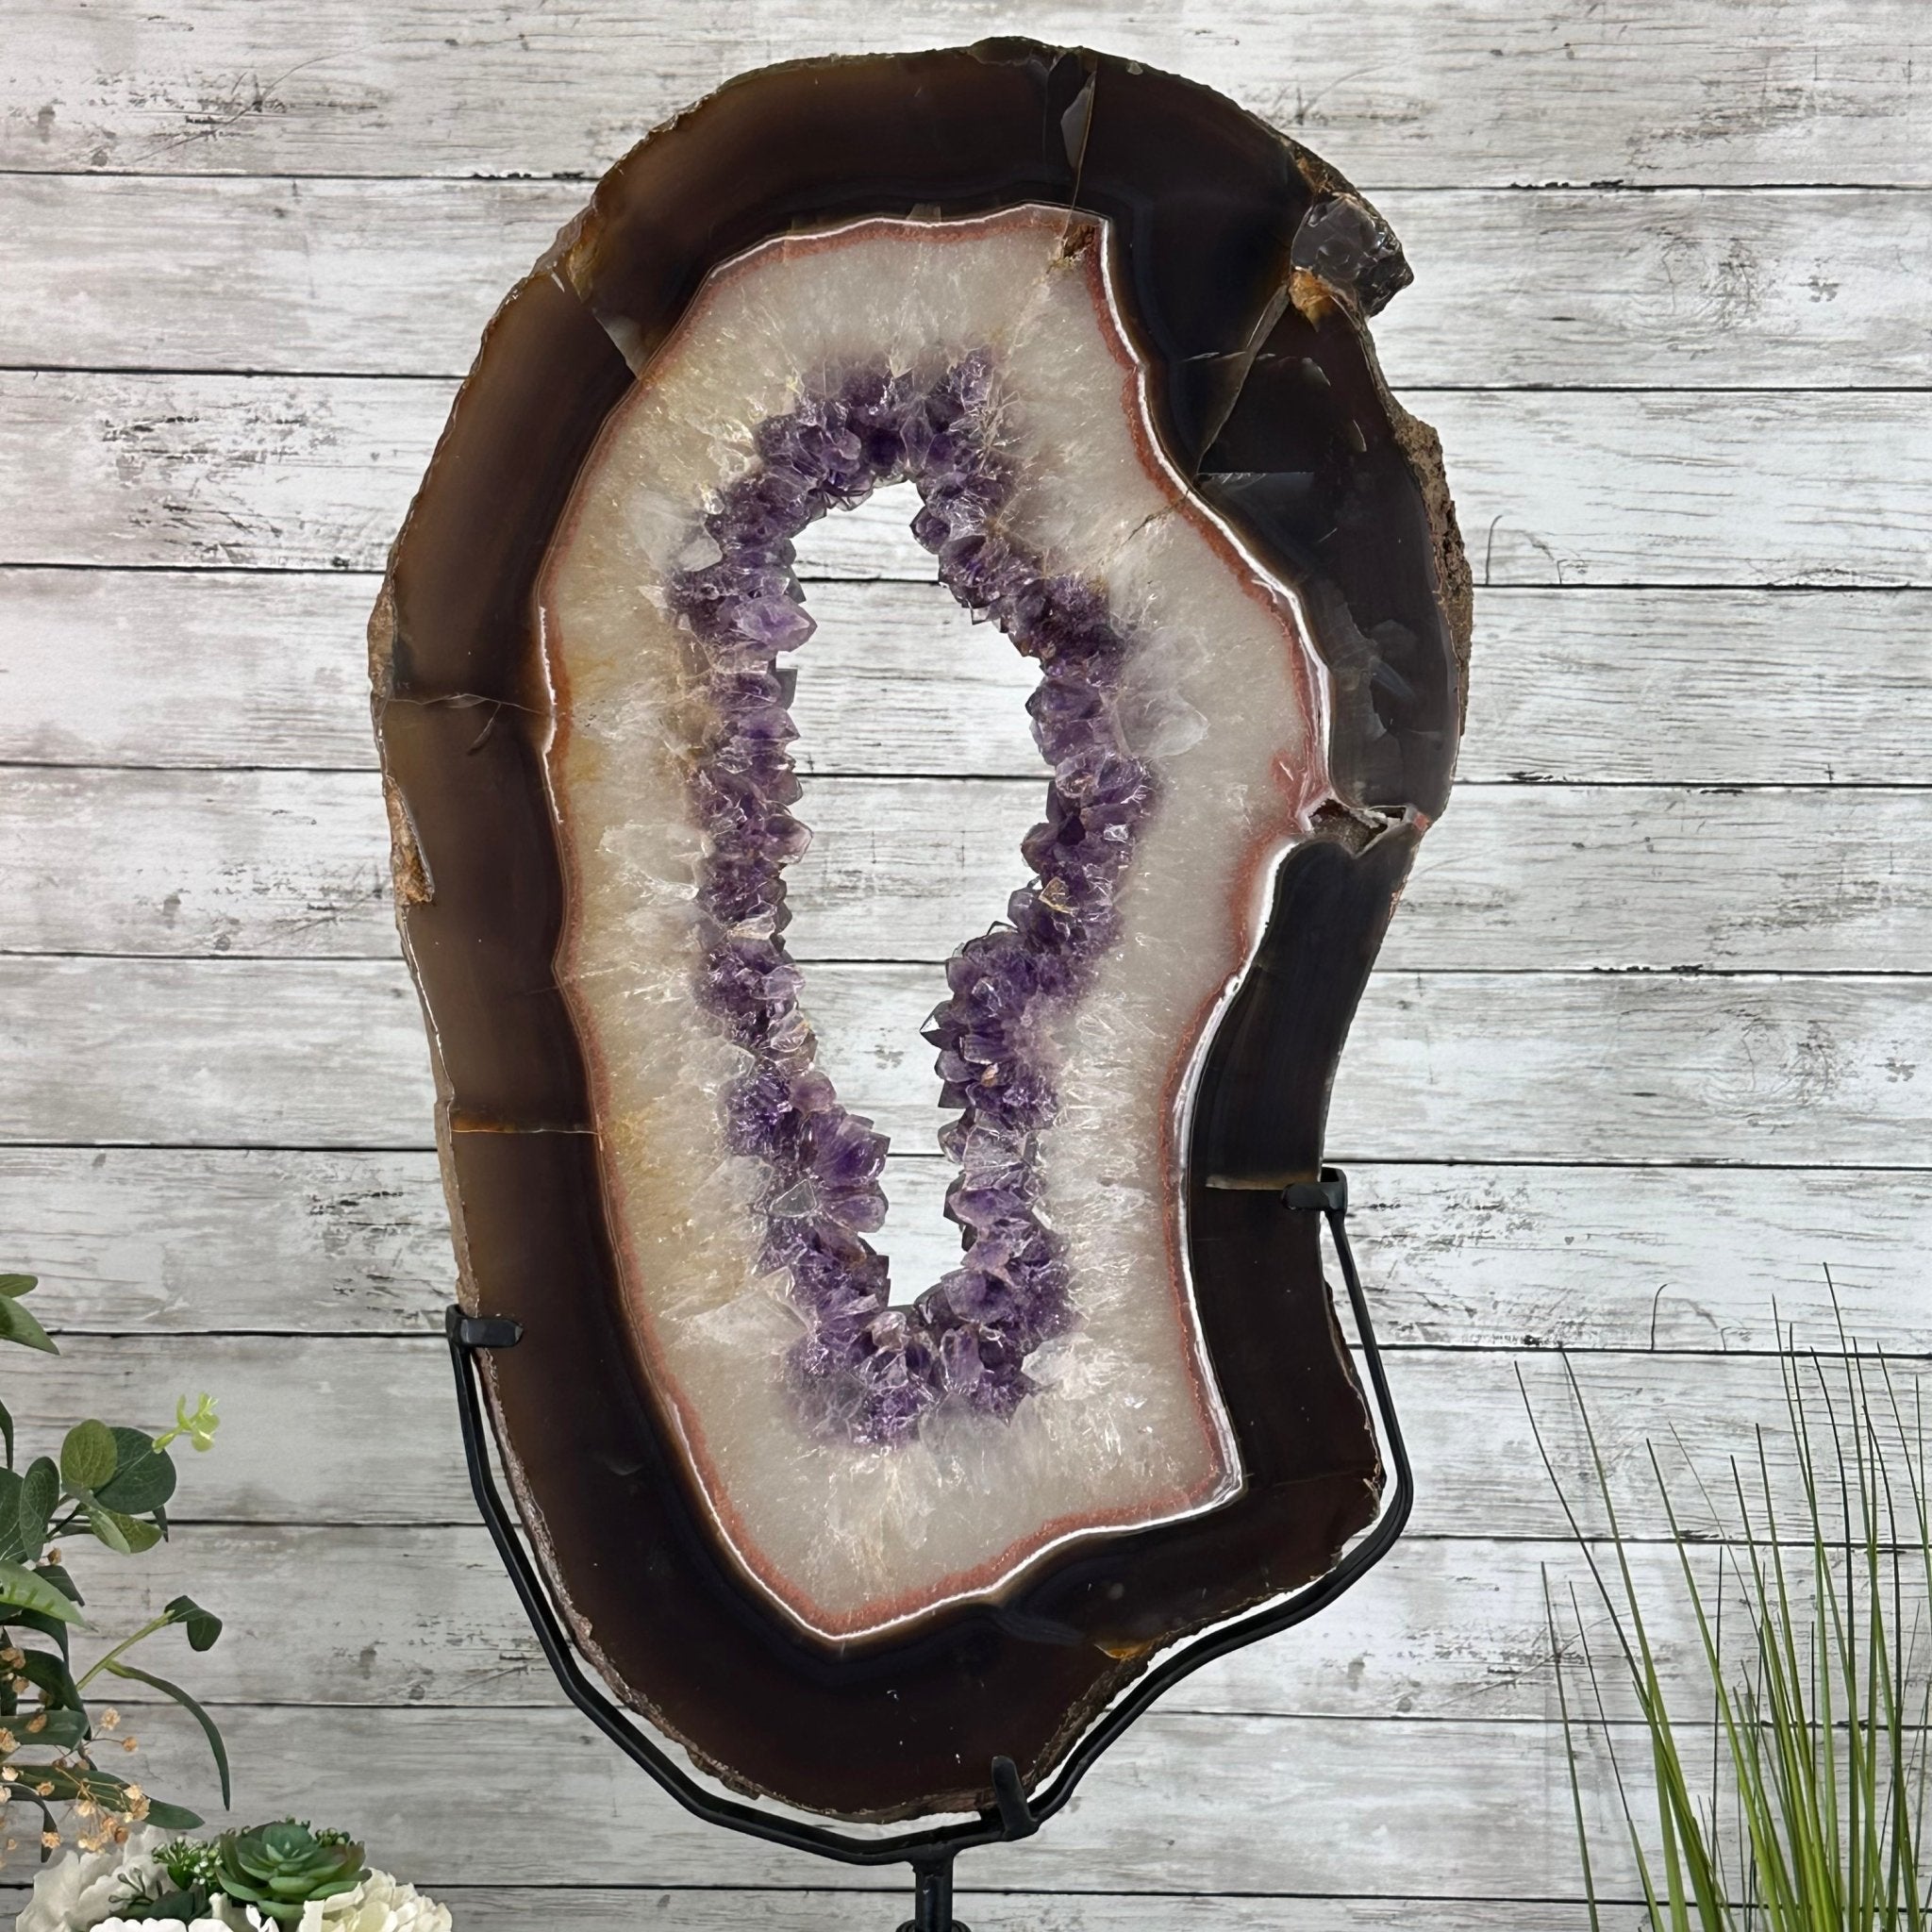 Extra Plus Quality Brazilian Amethyst Crystal Portal on a Rotating Stand, 21.1 lbs & 31" tall Model #5604-0127 by Brazil Gems - Brazil GemsBrazil GemsExtra Plus Quality Brazilian Amethyst Crystal Portal on a Rotating Stand, 21.1 lbs & 31" tall Model #5604-0127 by Brazil GemsPortals on Rotating Bases5604-0127